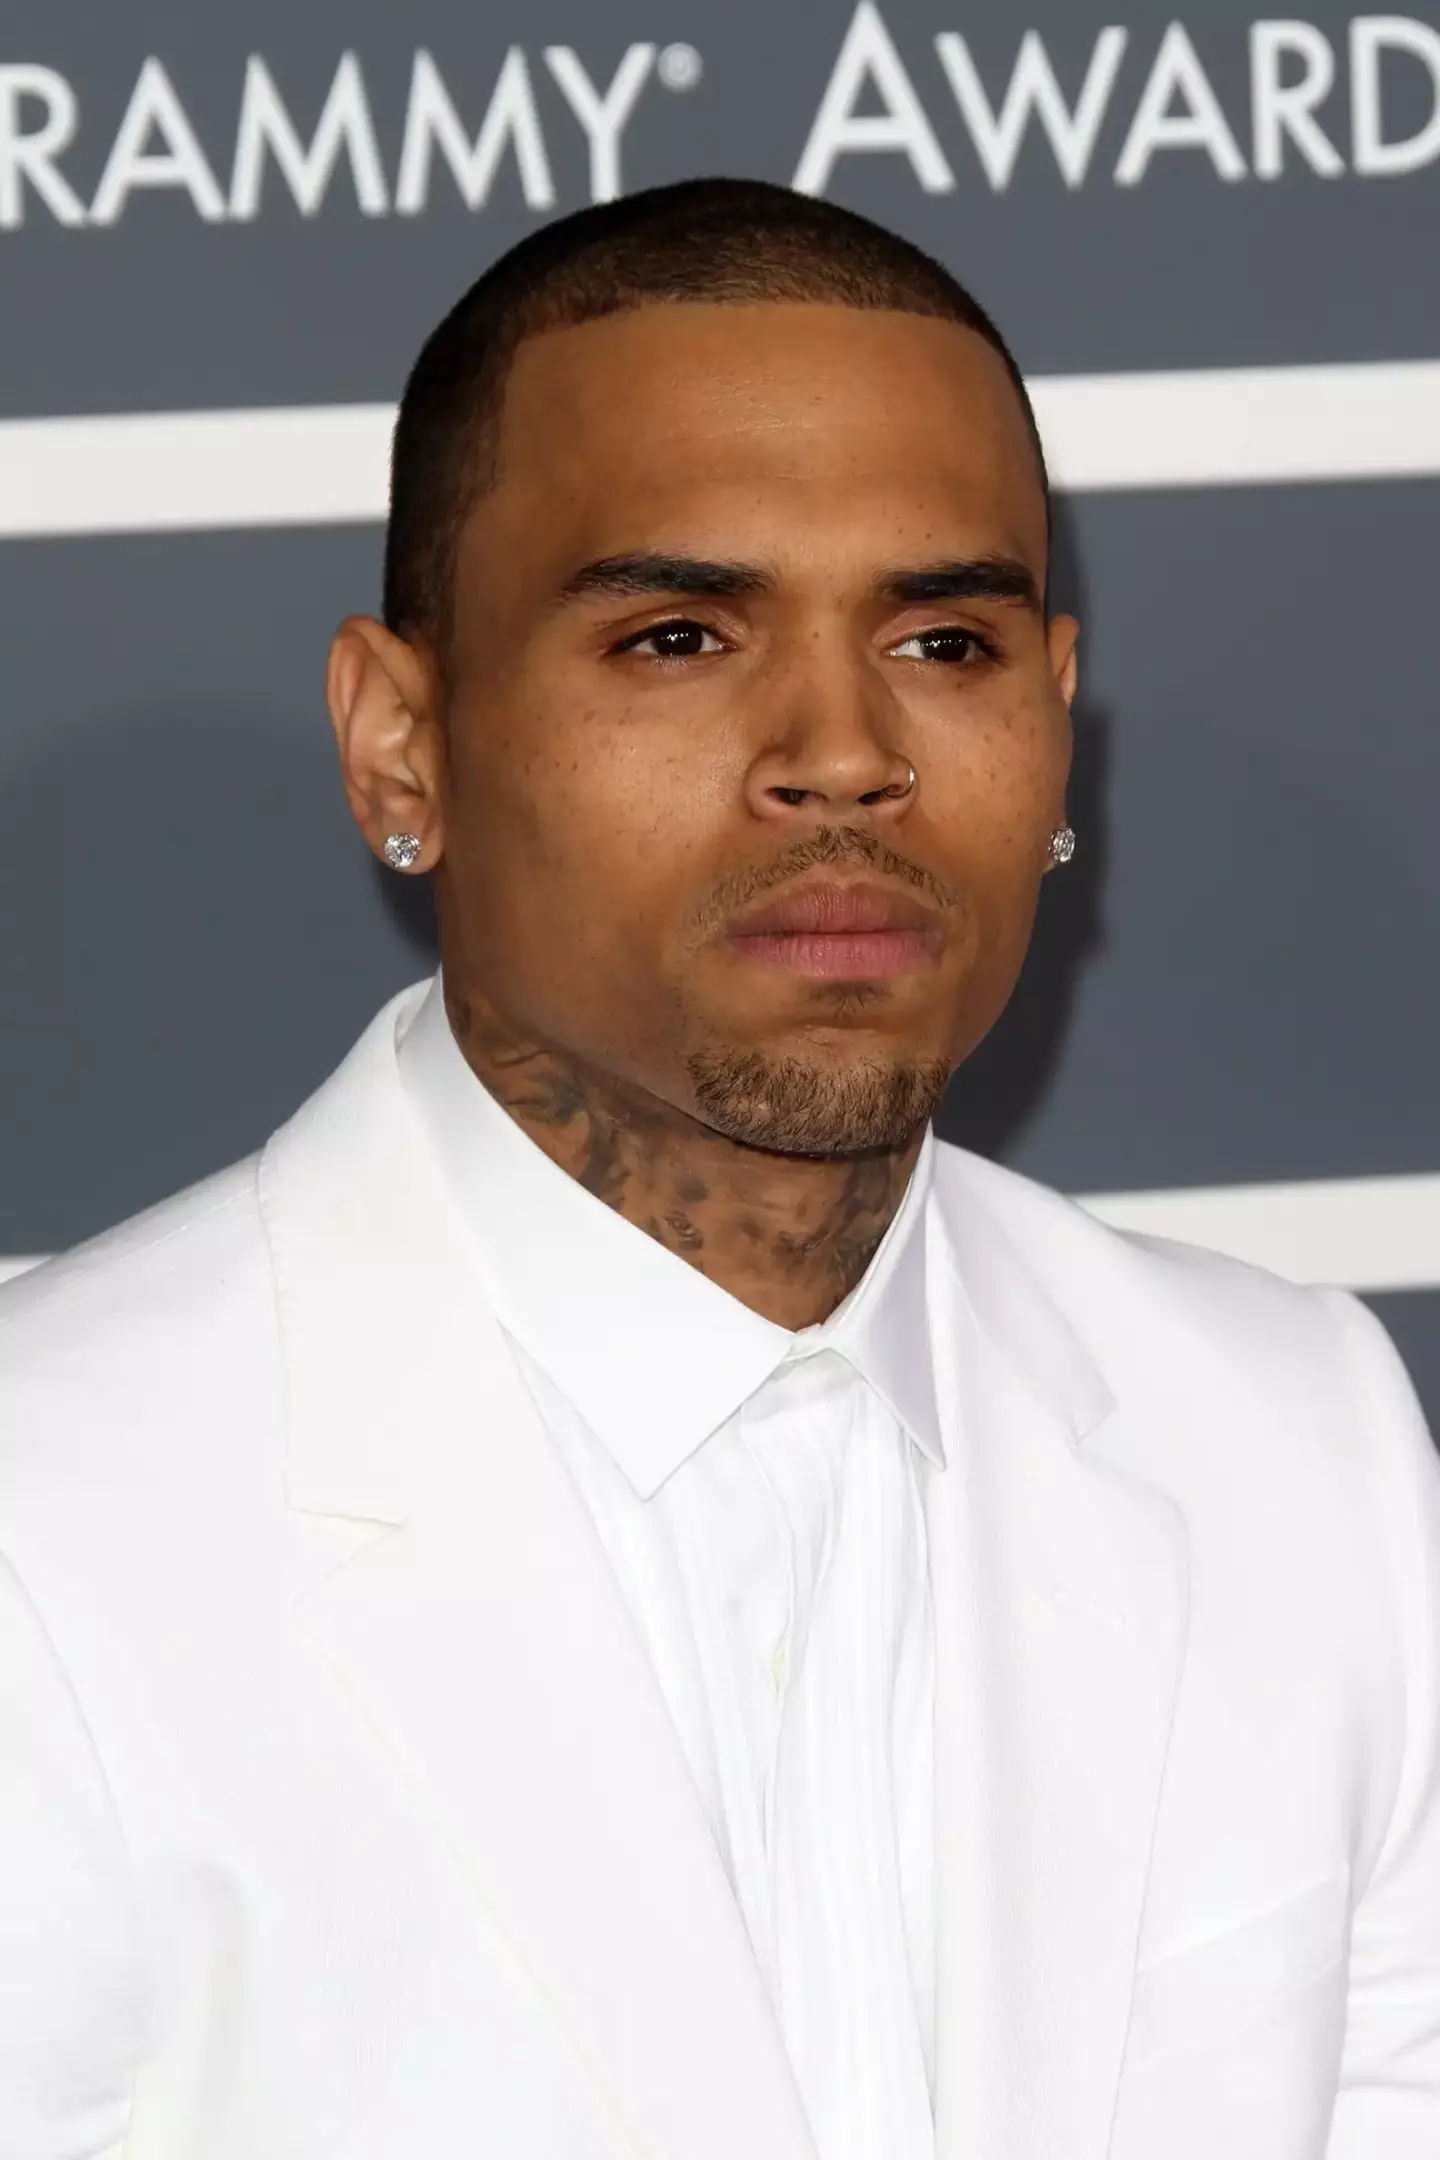 Chris Brown was arrested in 2009 for physically assaulting Rihanna. (